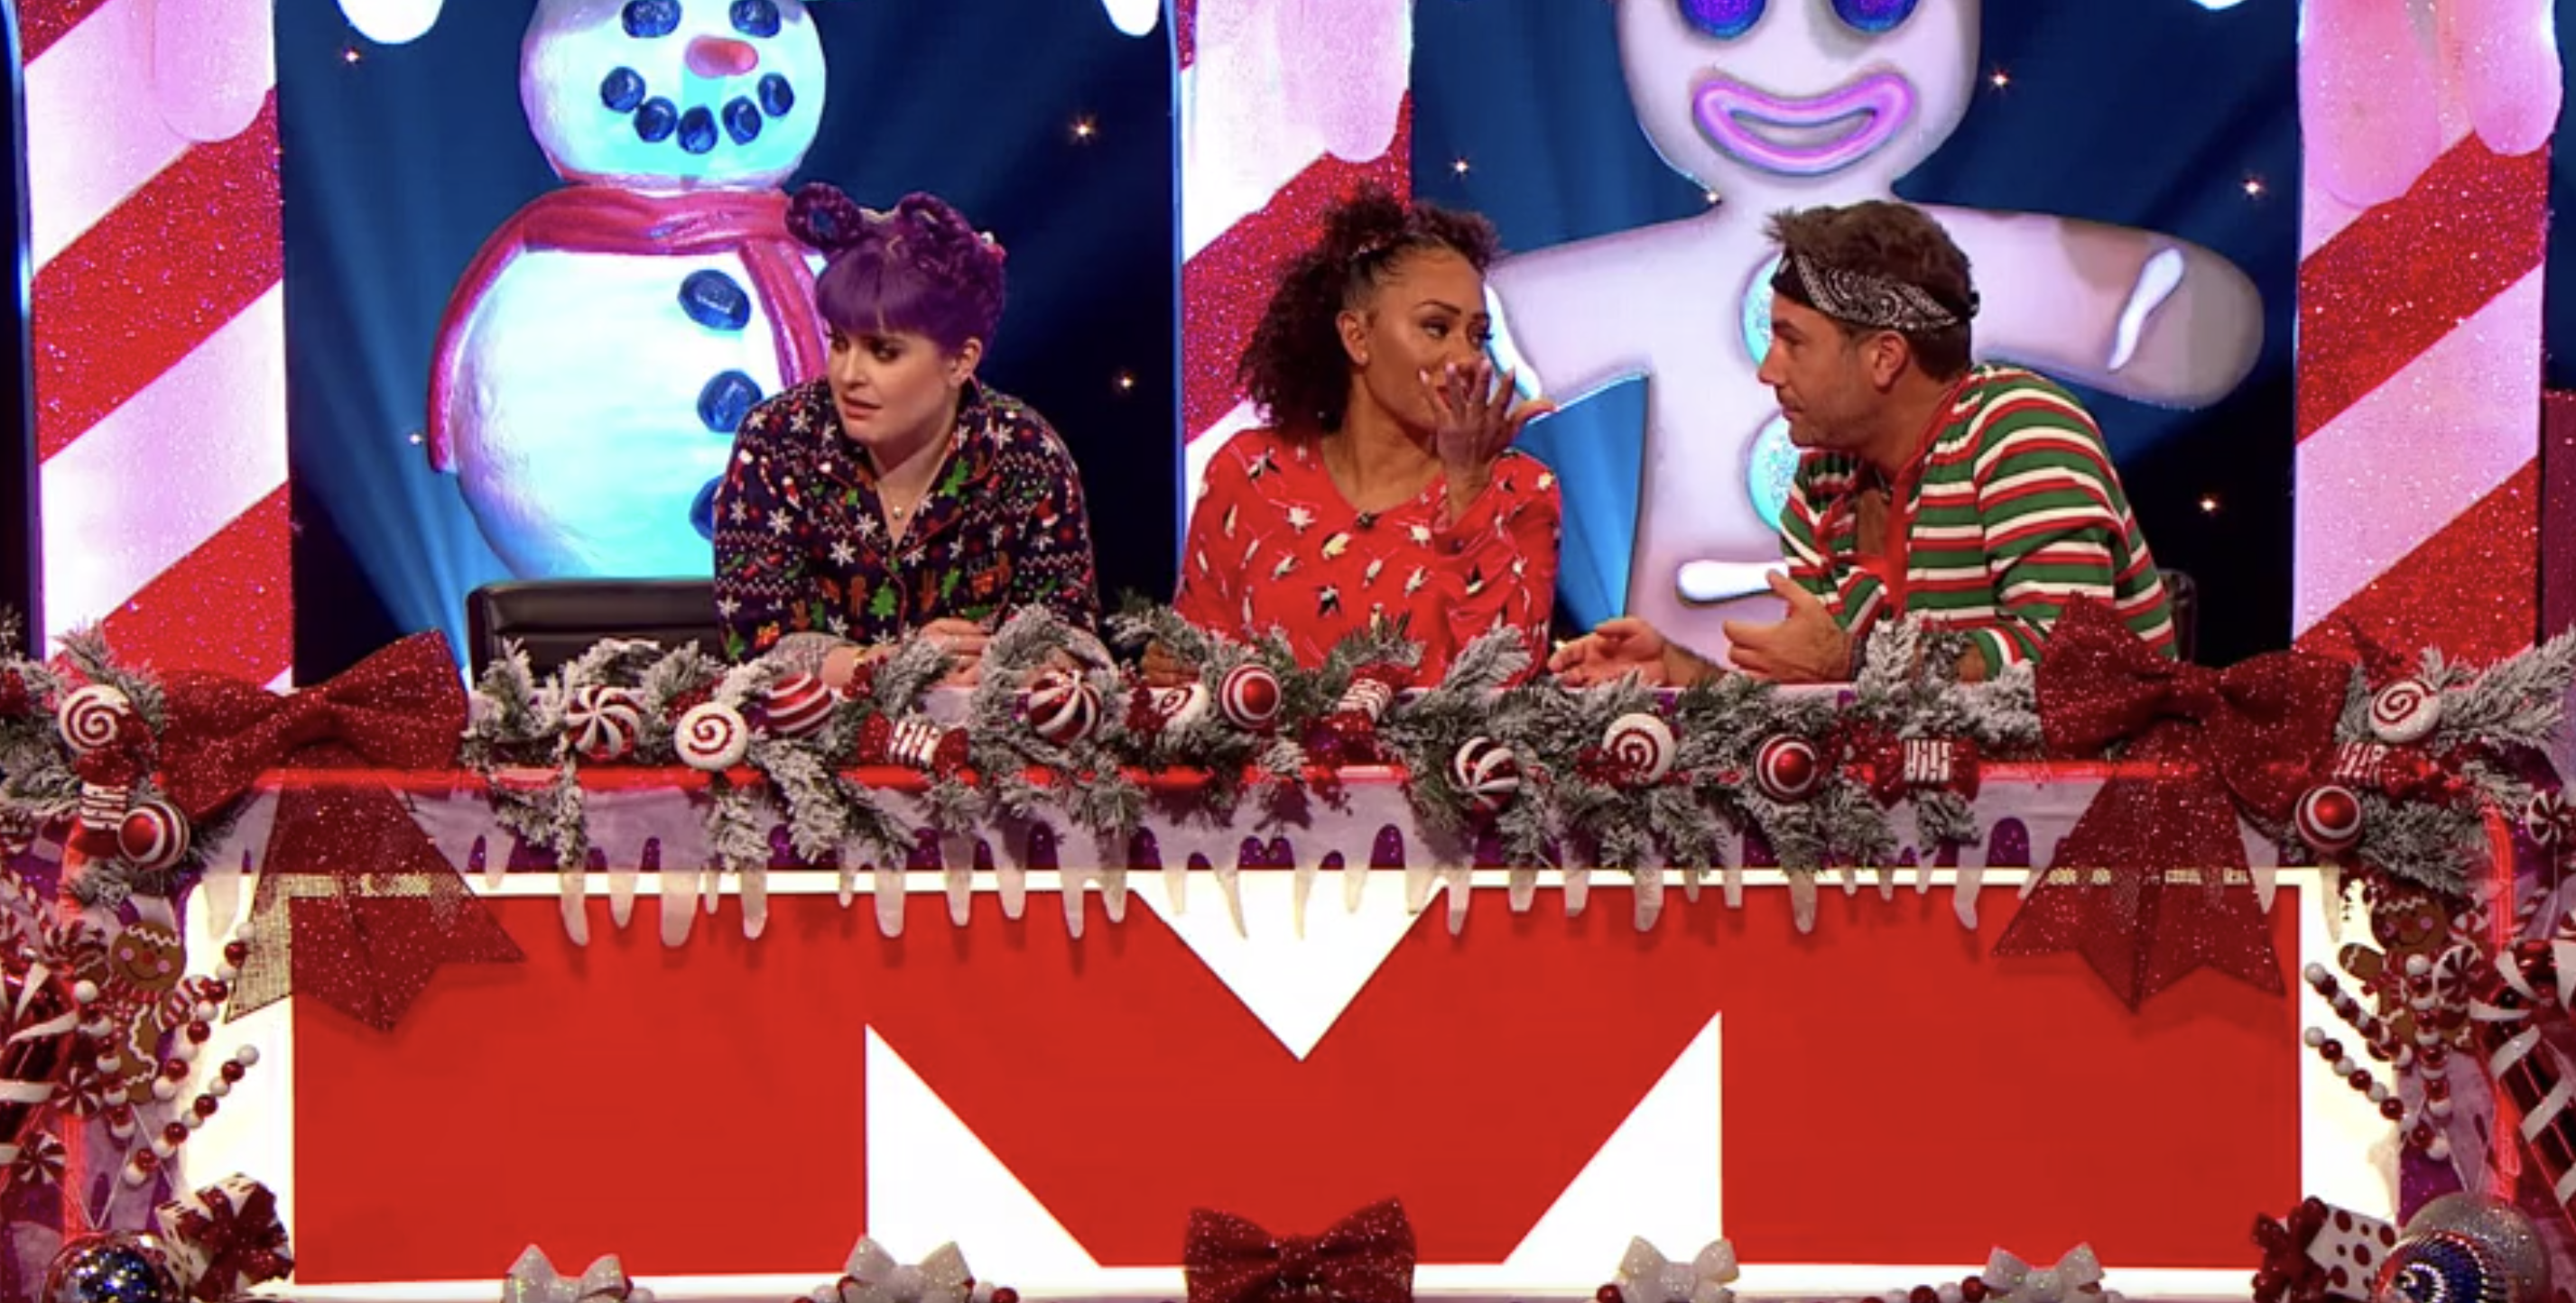 Celebrity Juice Christmas special 2019 gets more inappropriate than ever: Tiramisu, kissing and cat litter